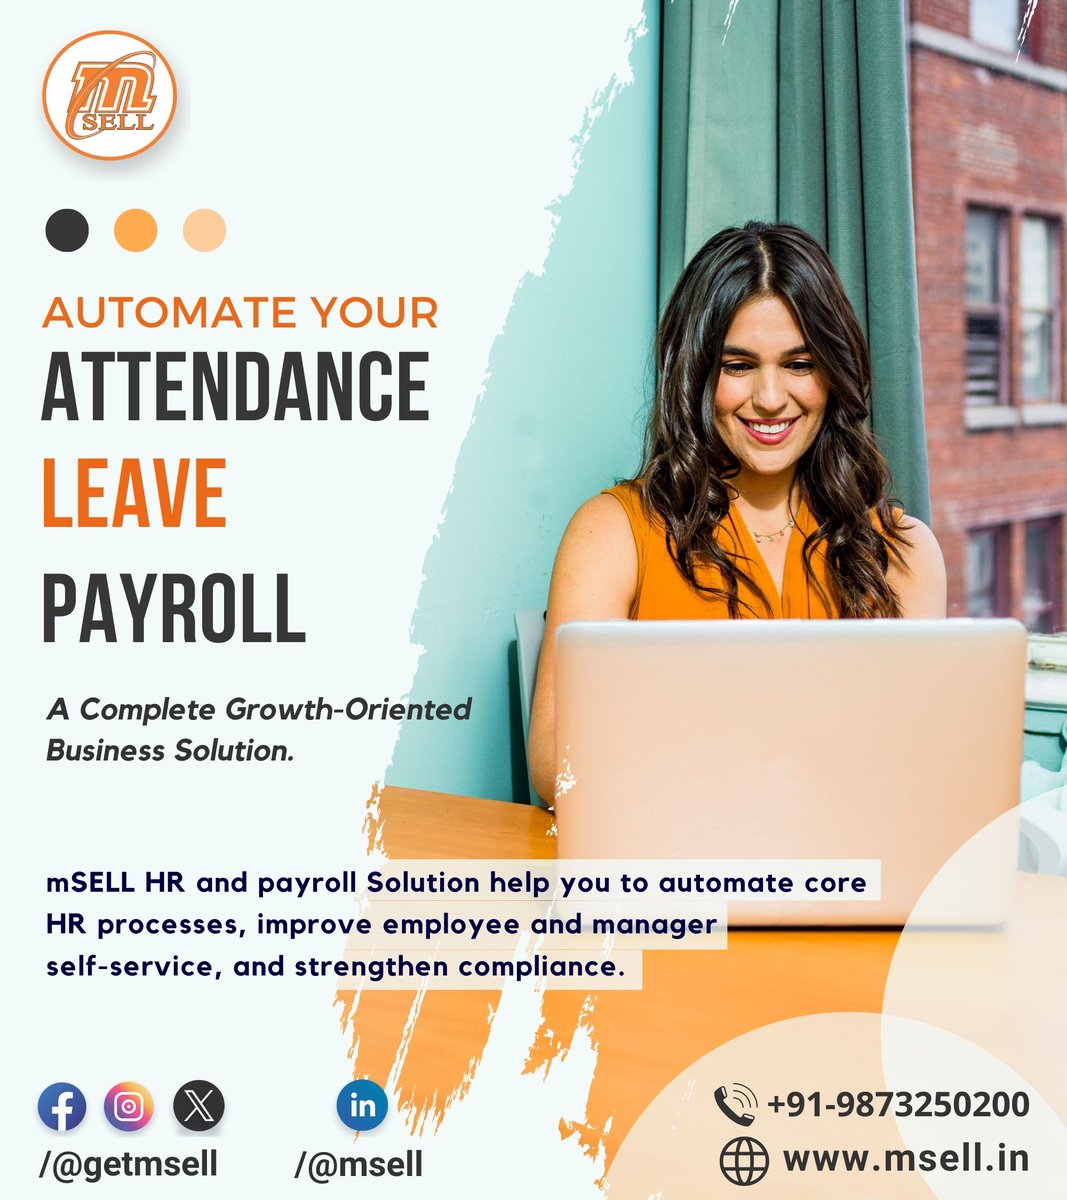 Elevate your potential by using mSELL HR & Payroll processes.

With Features
👉 Attendance & Leave
👉 Payroll
👉 Tracking Attendance
👉 Reports Generation
and many more...

Contact us for more details: 👇
📞Dial: +91 9873250200

#hrms #payrollmanagement #employeemanagement #saas